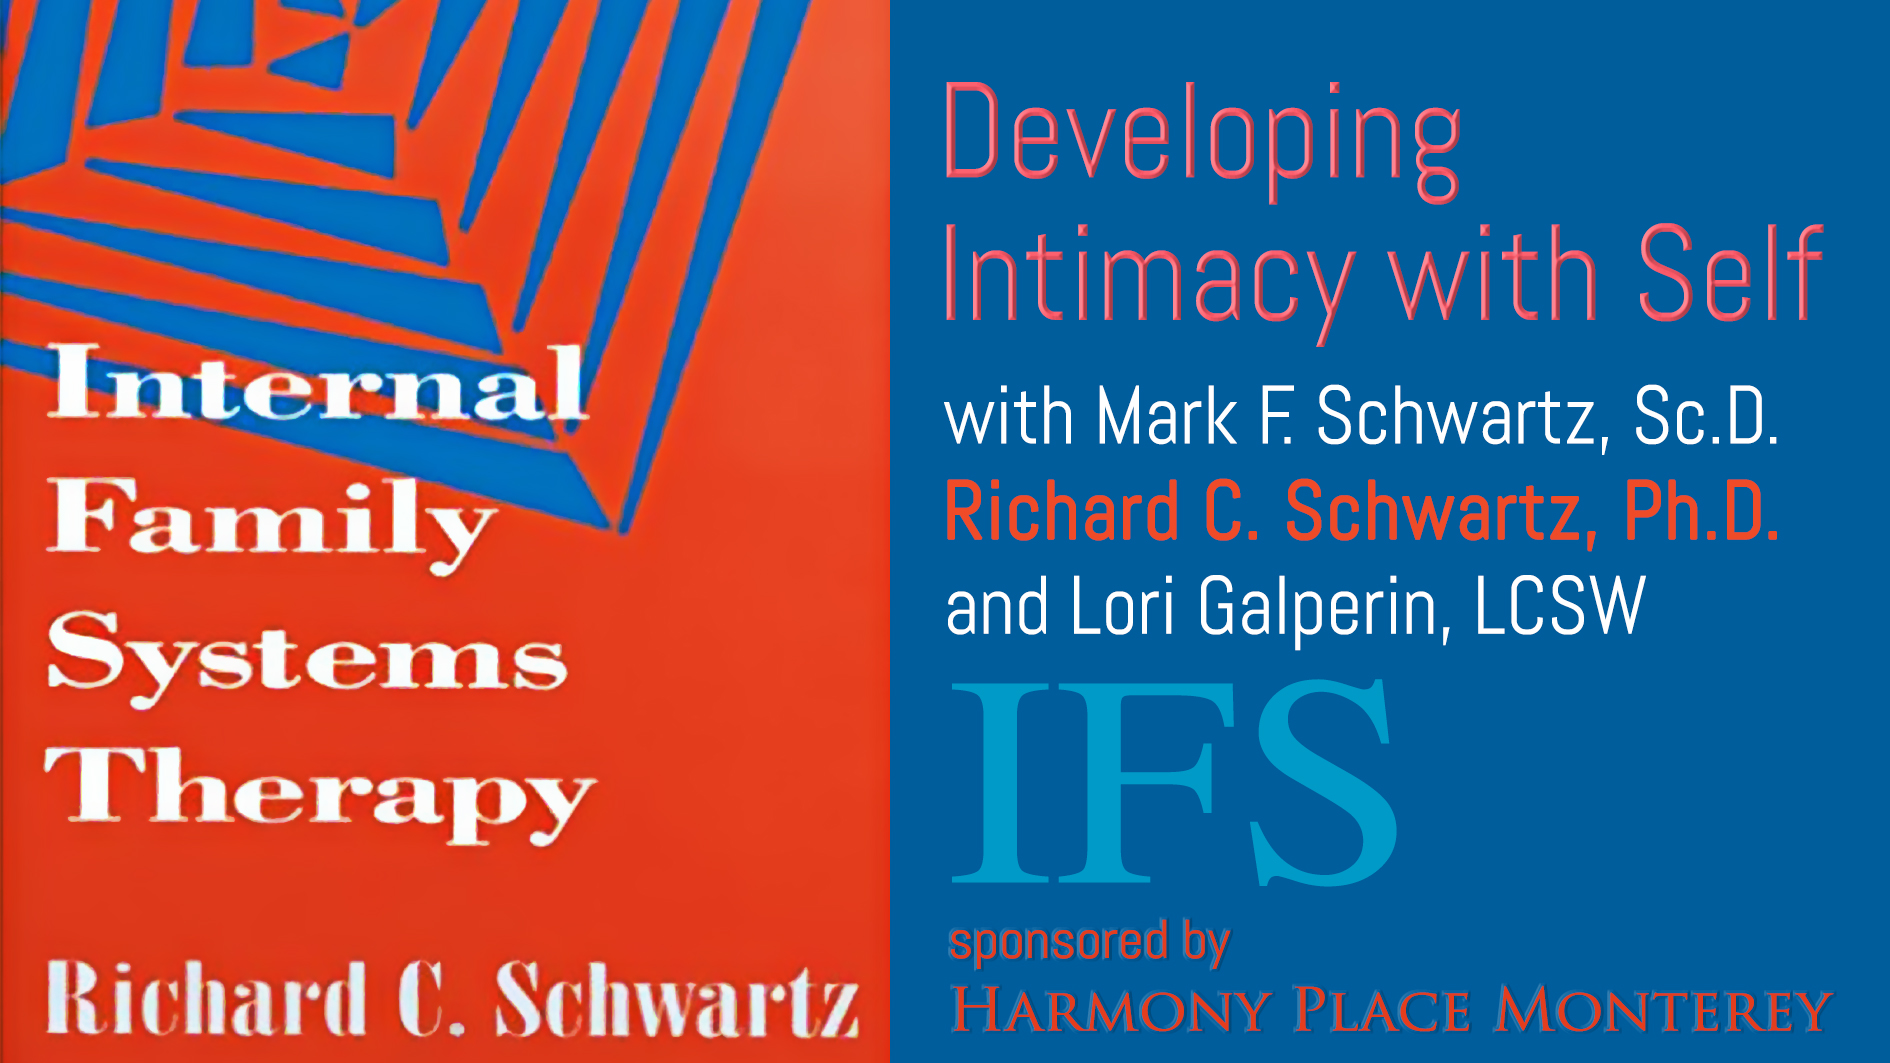 WORKSHOP VIDEO:  Internal Family Systems | Developing Intimacy with Self